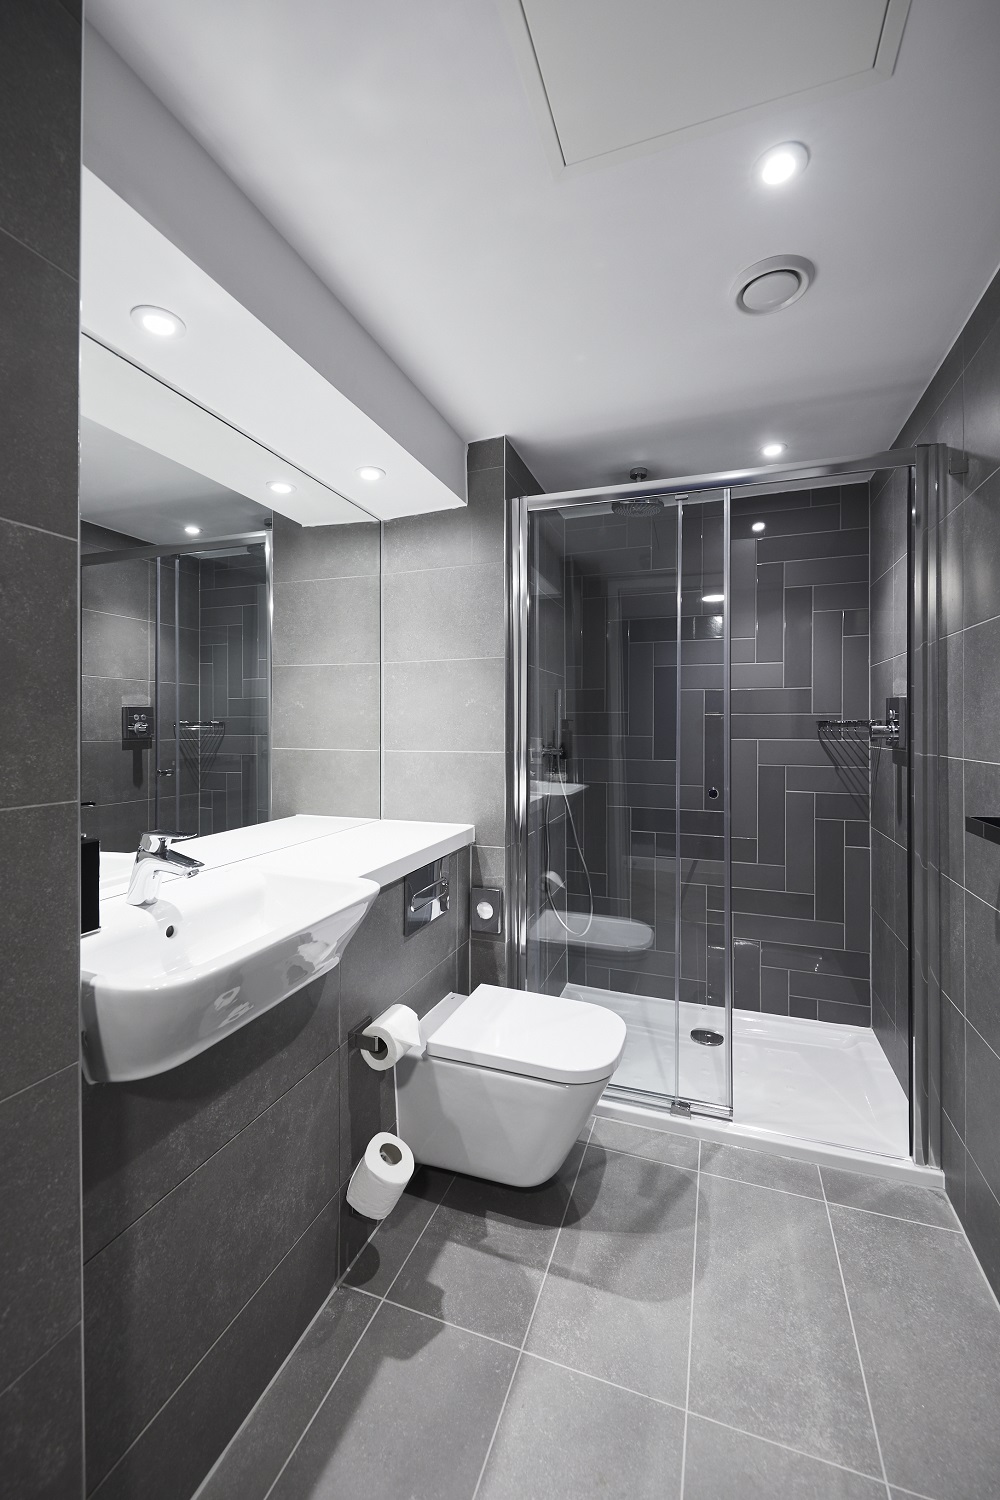 Roca bathroom products specified for Roomzzz